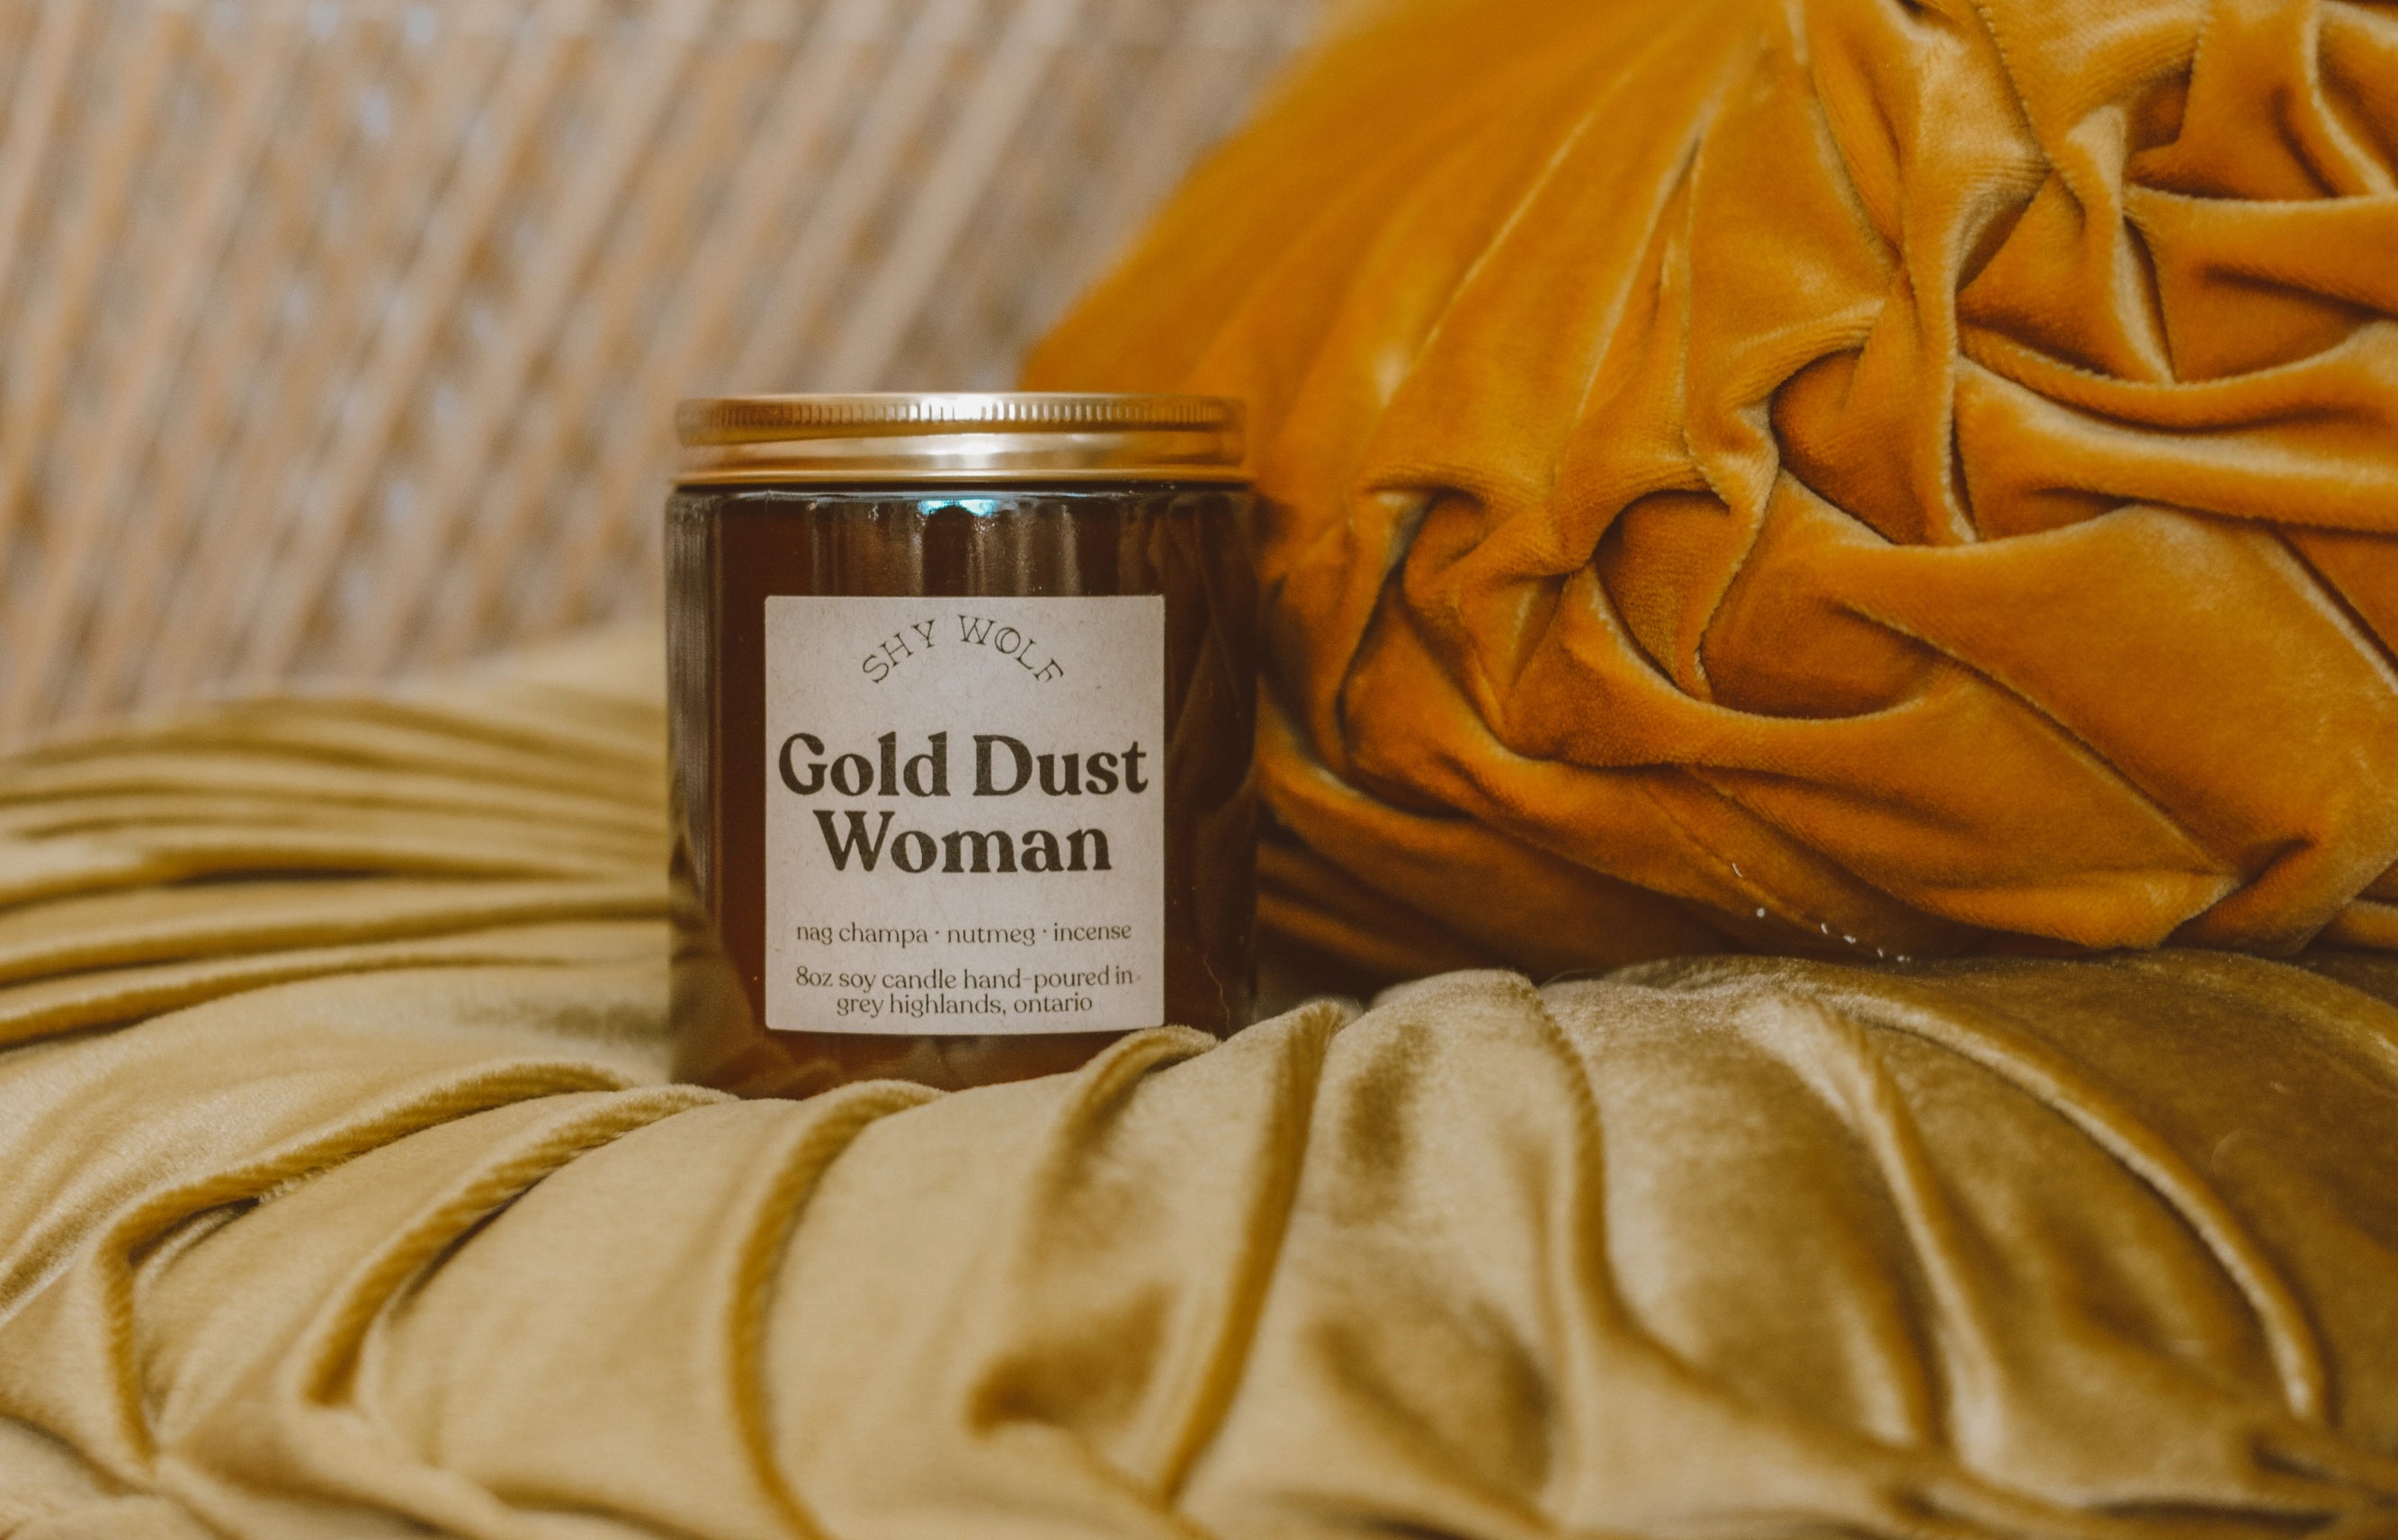 Gold Dust Woman Soy Candle - Incense, Nag Champa, Nutmeg